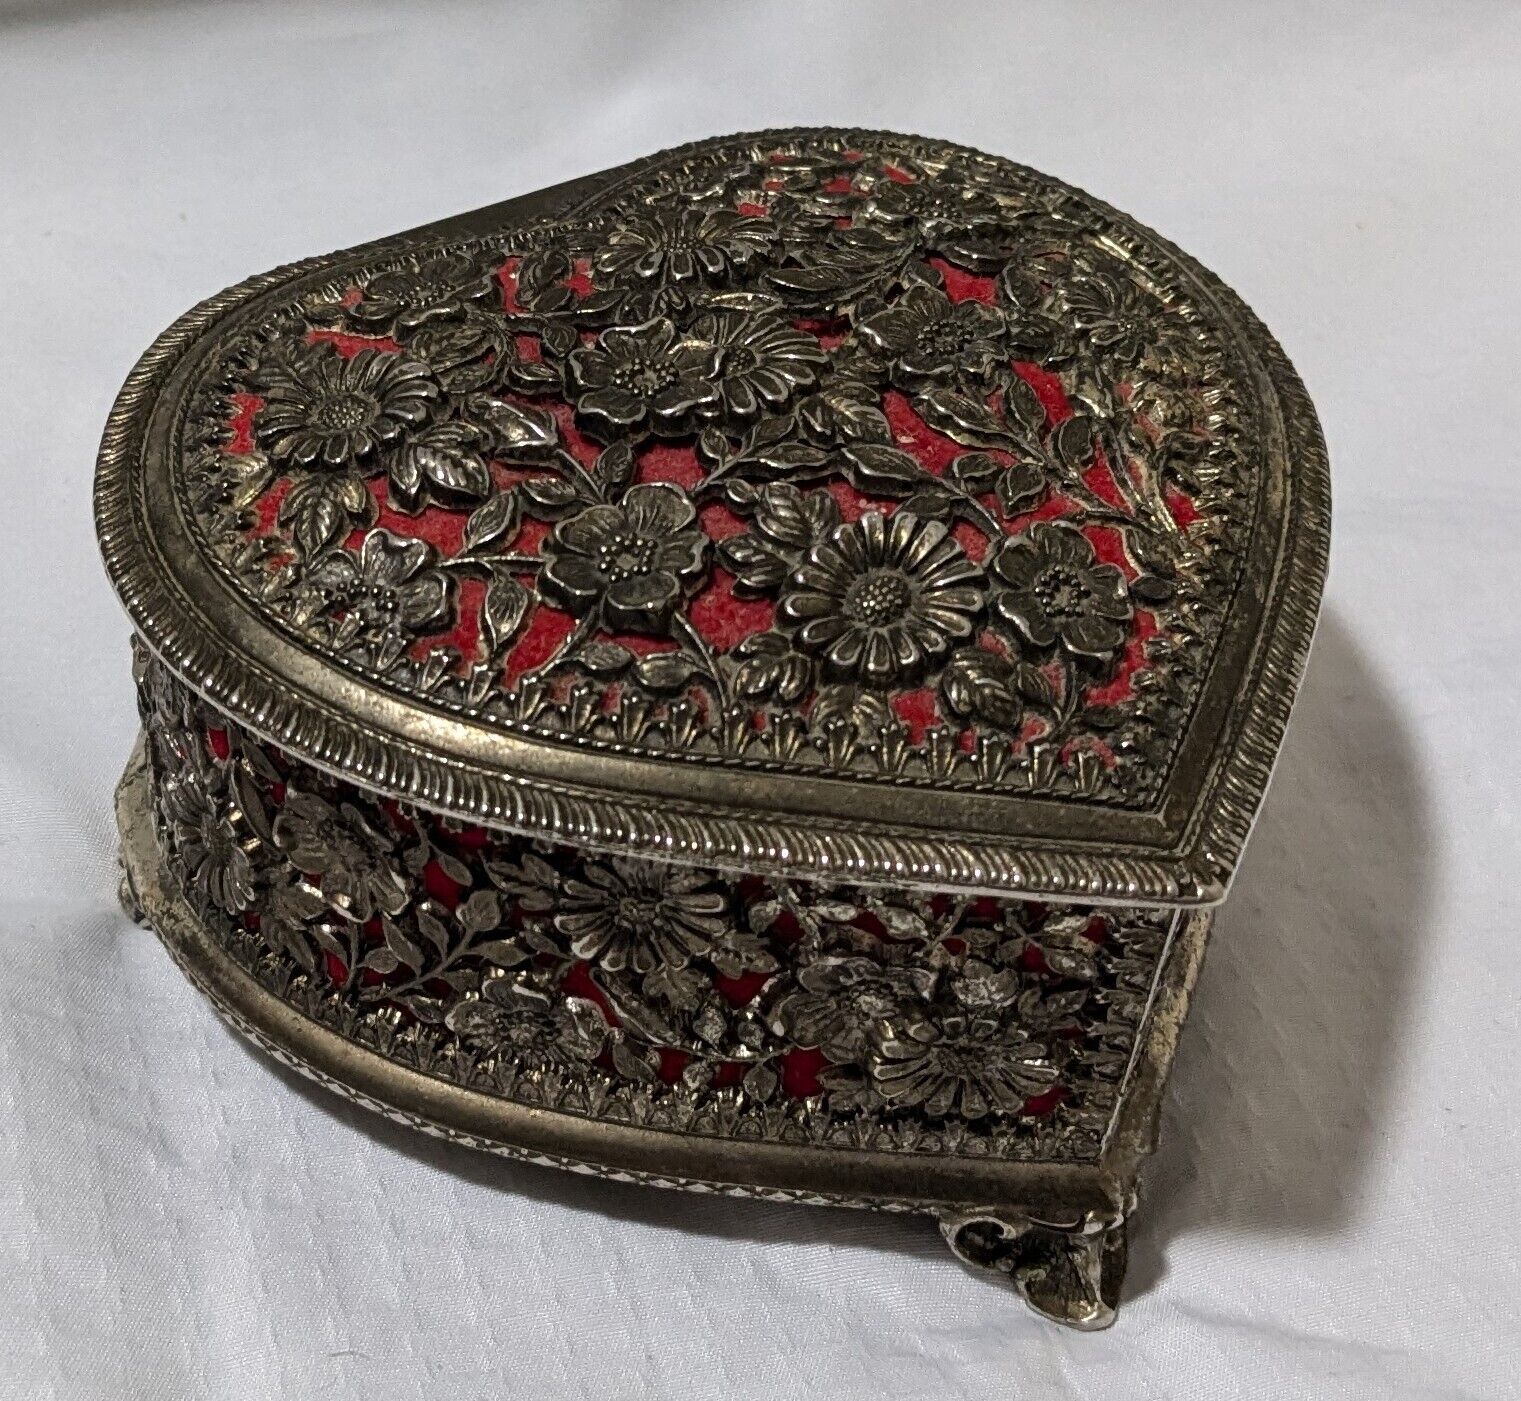 Vintage Heart Trinket Jewelry Box Silver Tone Metal Cut Away Floral Tri Footed